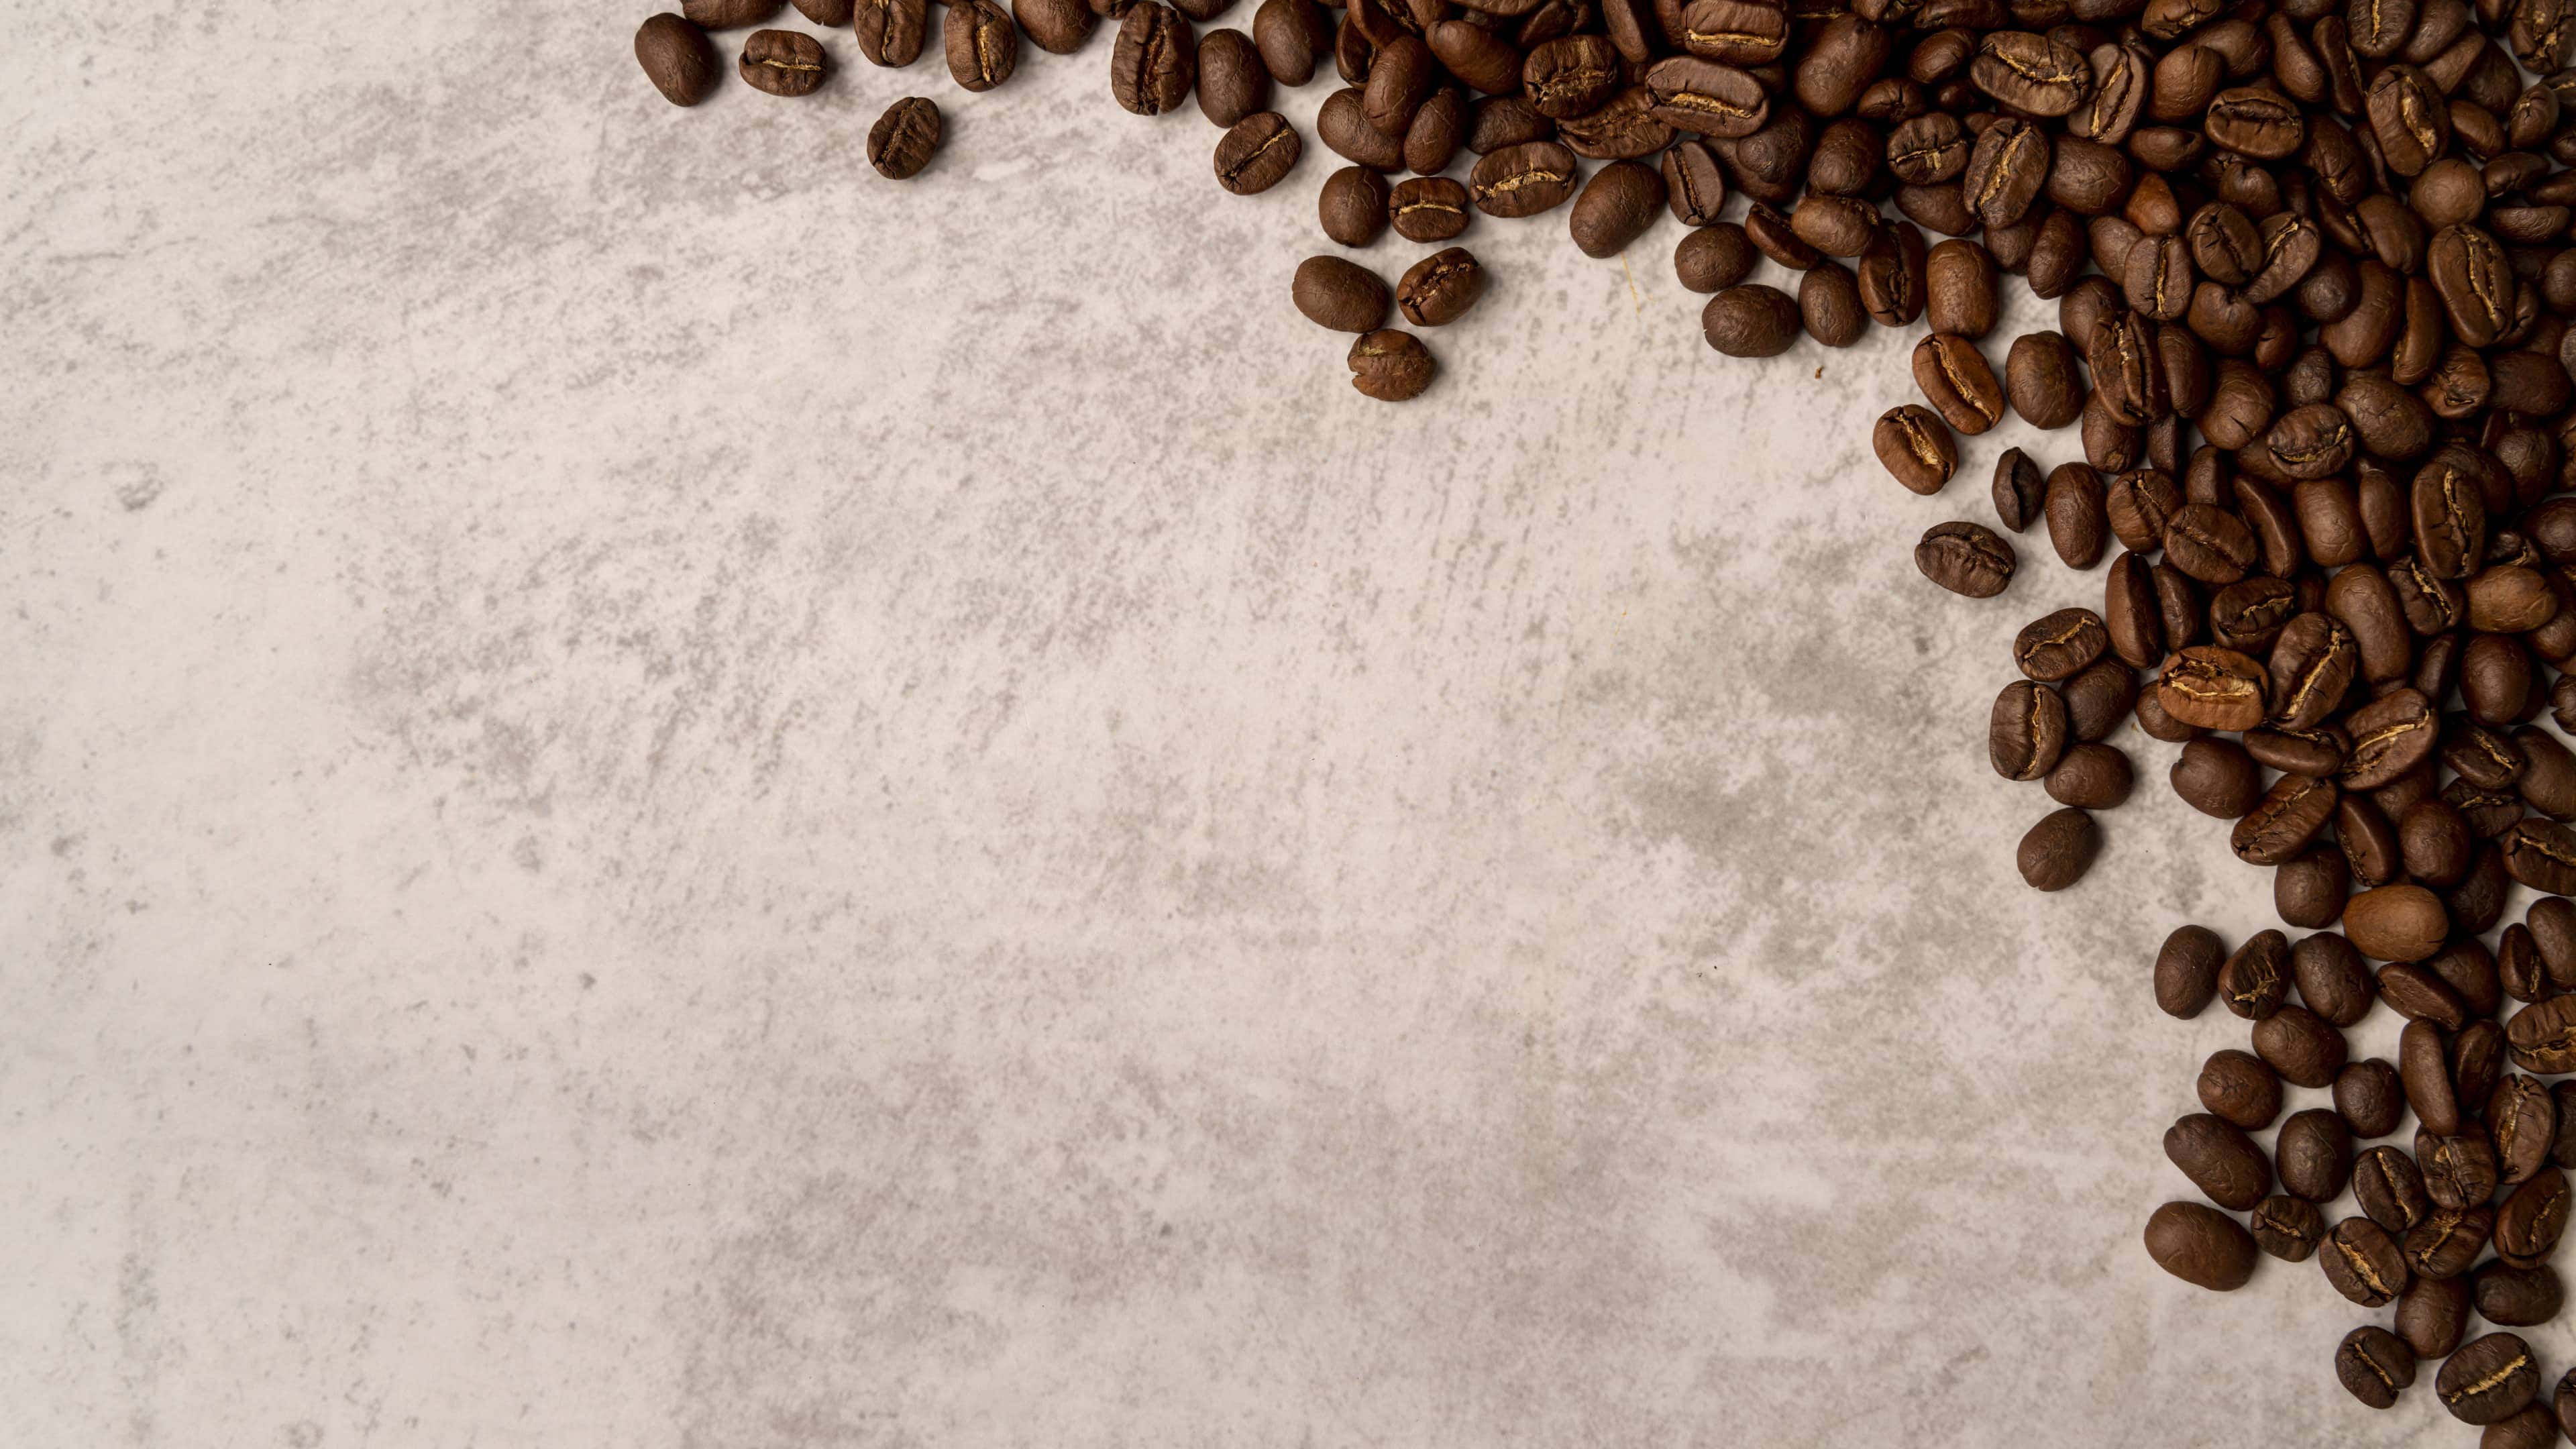 Roasted coffee beans on bright background